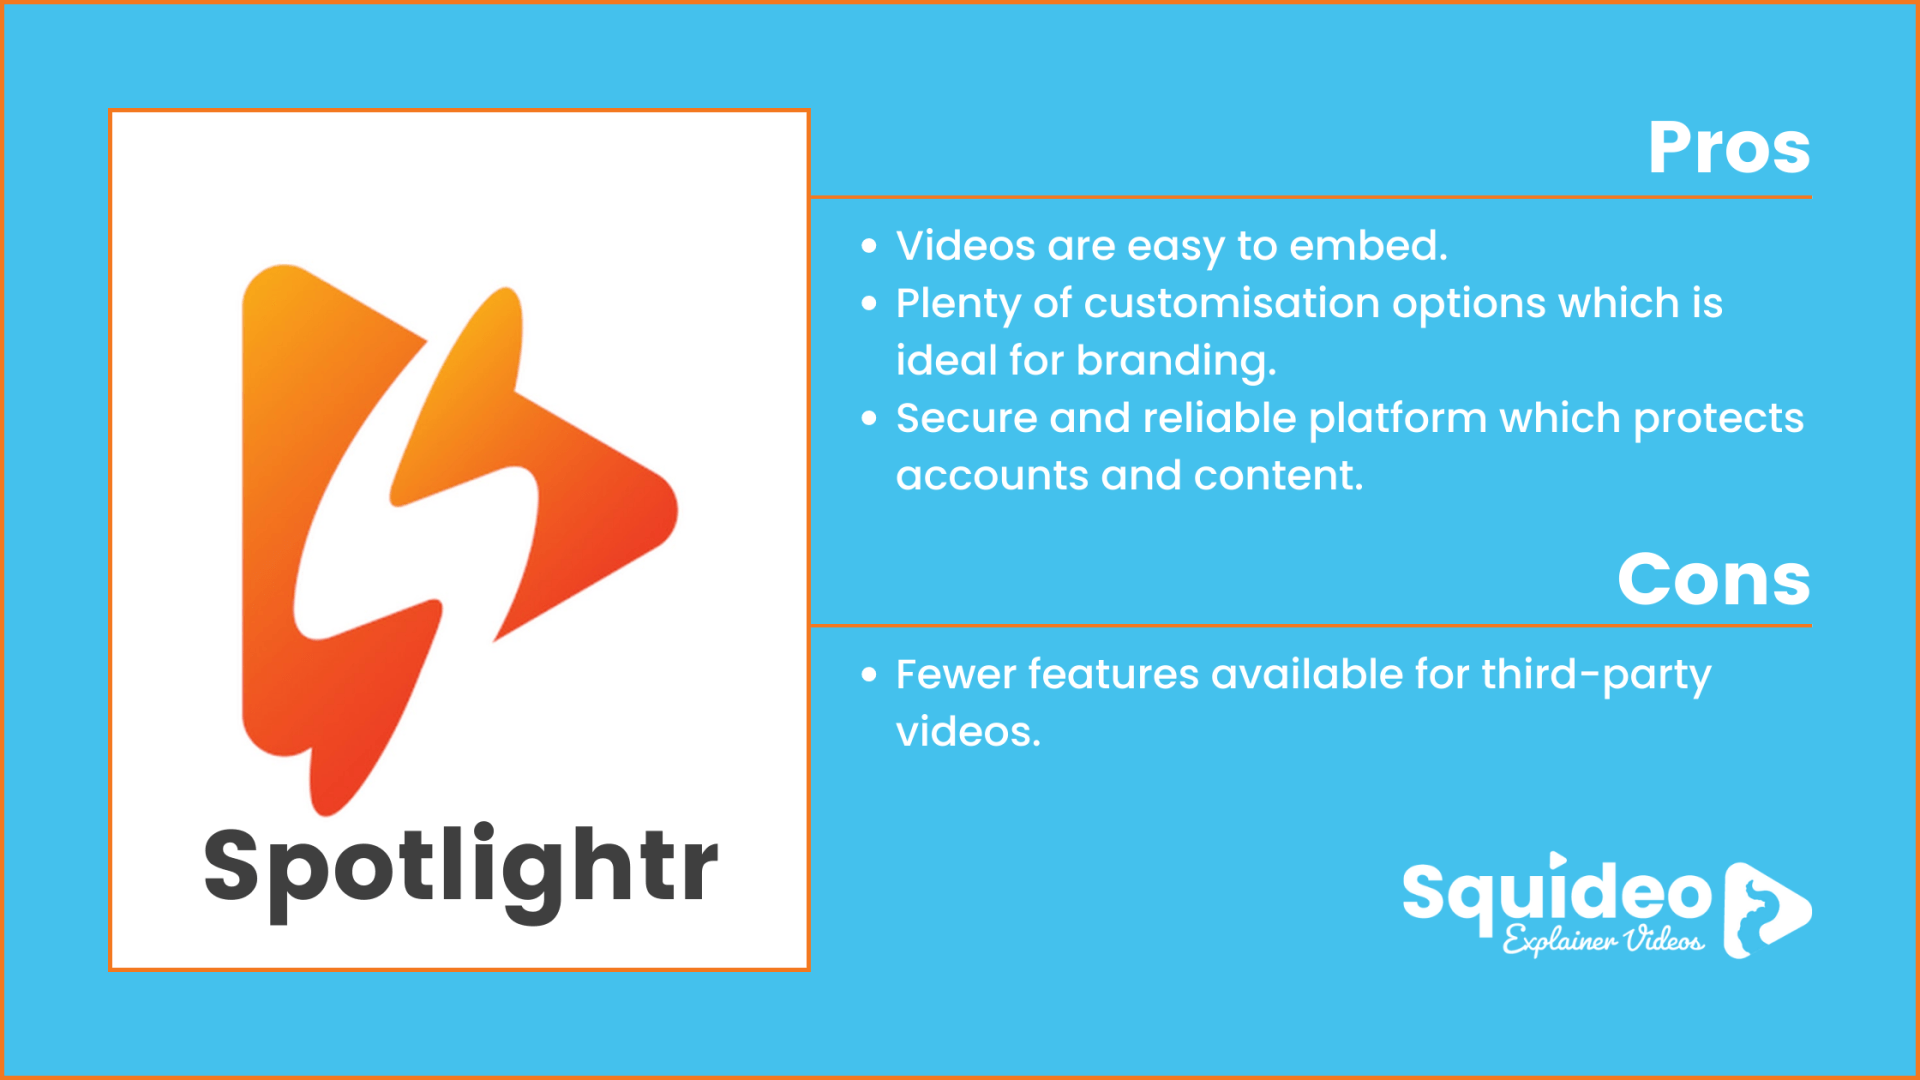 Spotlightr vooPlayer Video Pros and Cons